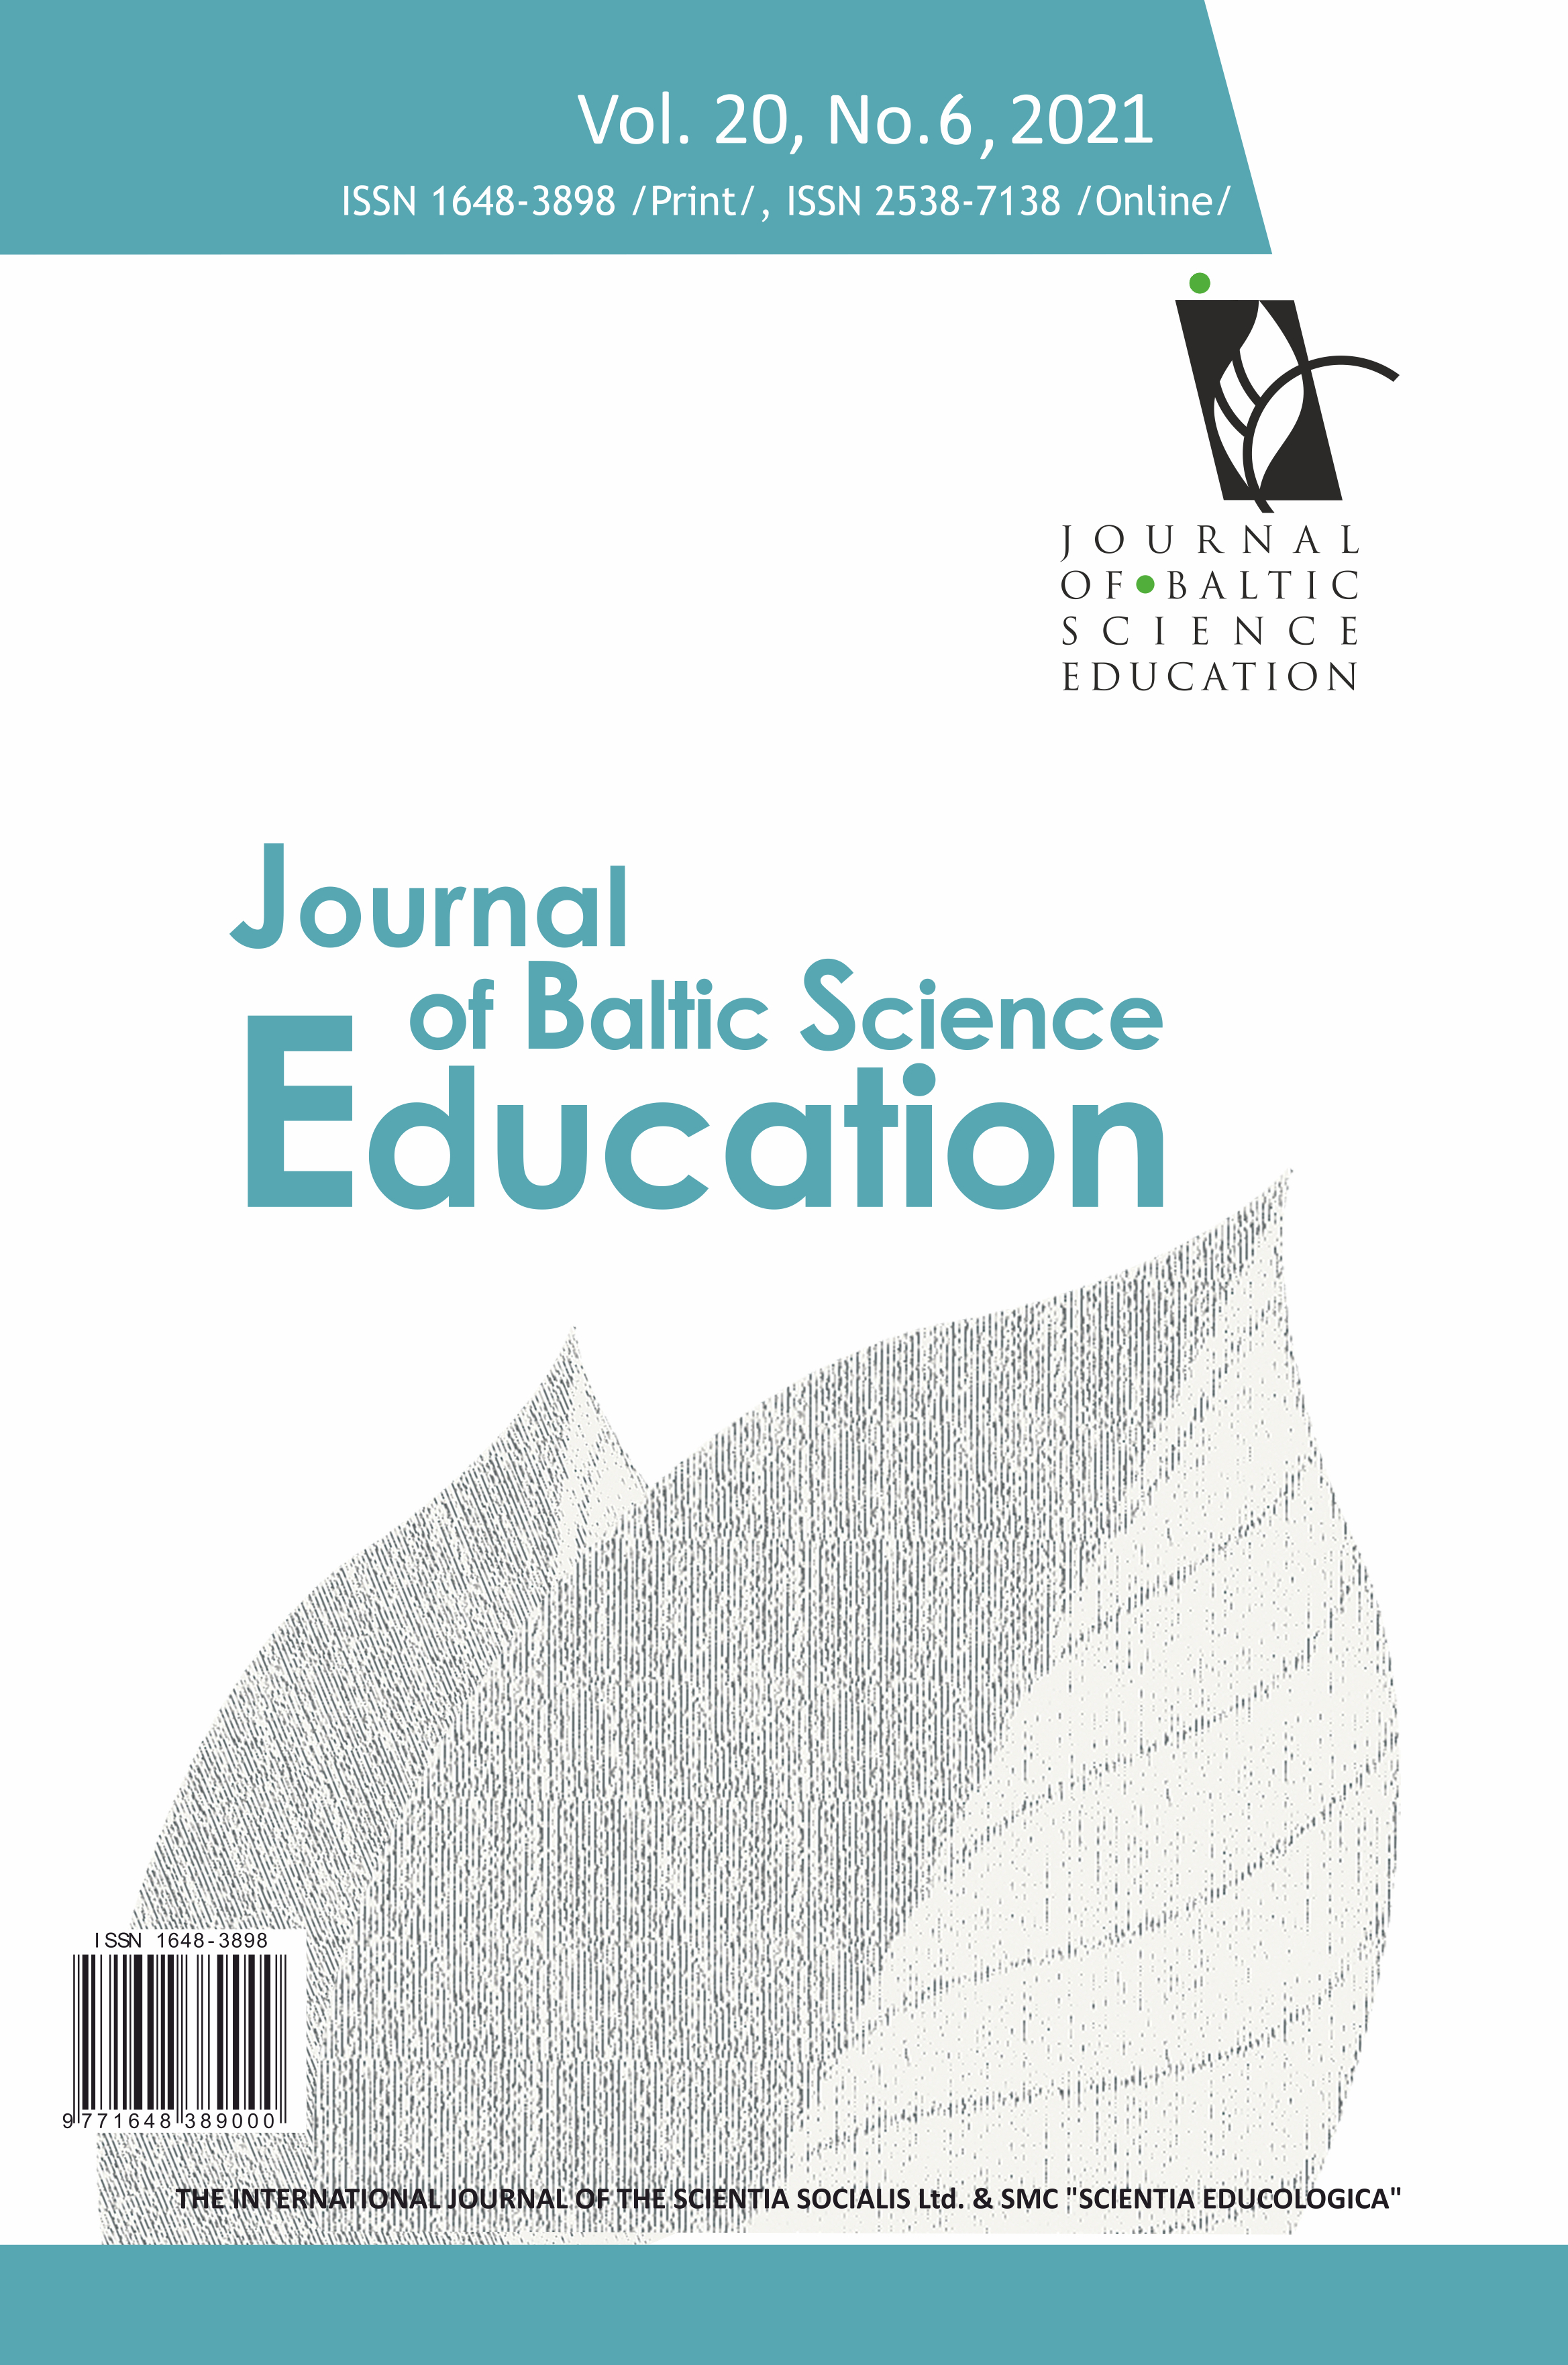 PUBLIC SCIENCE EDUCATION: SOME MORE ROLES AND CONTRIBUTIONS